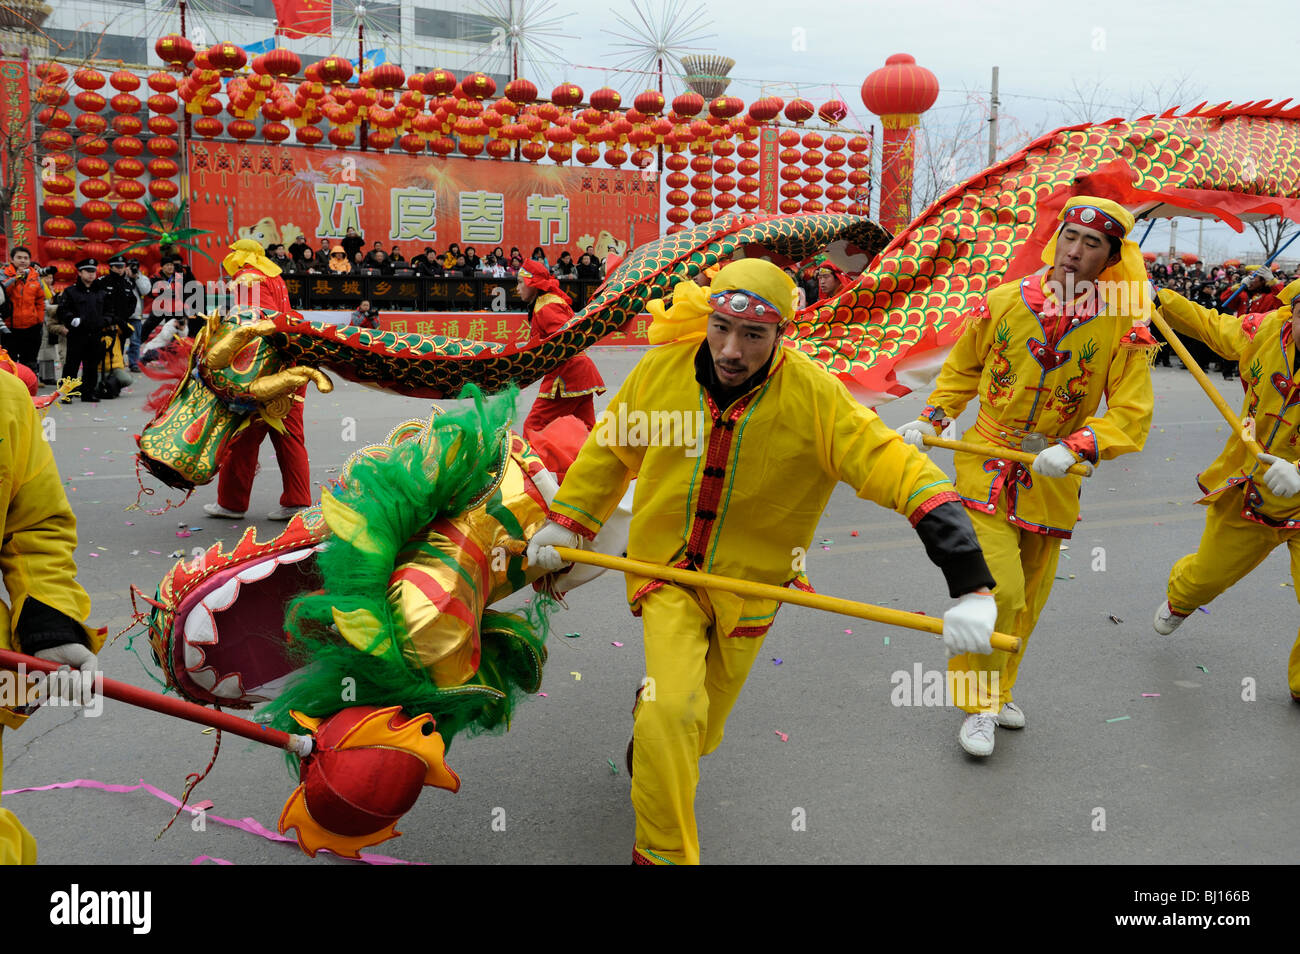 People perform traditonal dragon dancing during Yuanxiao Festival or the Lantern Festival in Yuxian, Hebei, China. 28-Feb-2010 Stock Photo